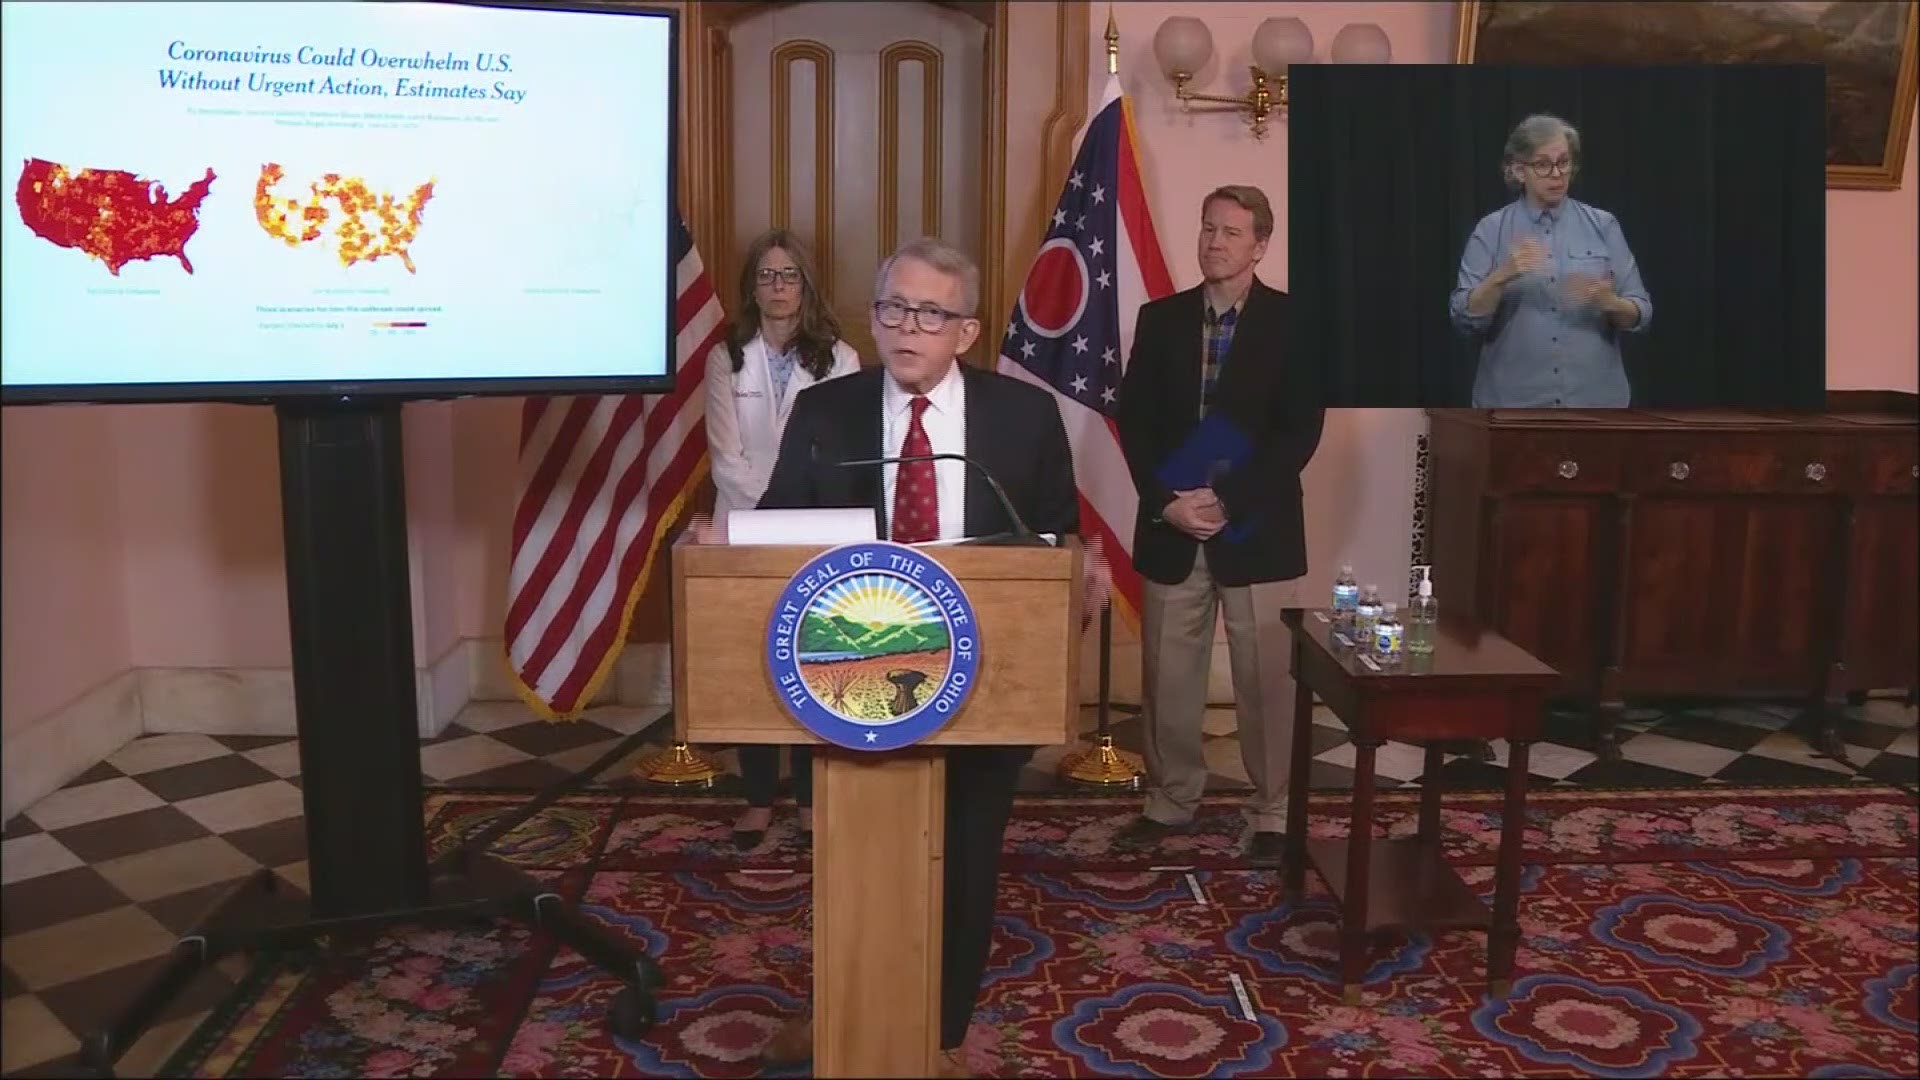 Gov. Mike DeWine offered stern warnings on Saturday. The total number of coronavirus cases in Ohio is now up to 247, with three deaths.